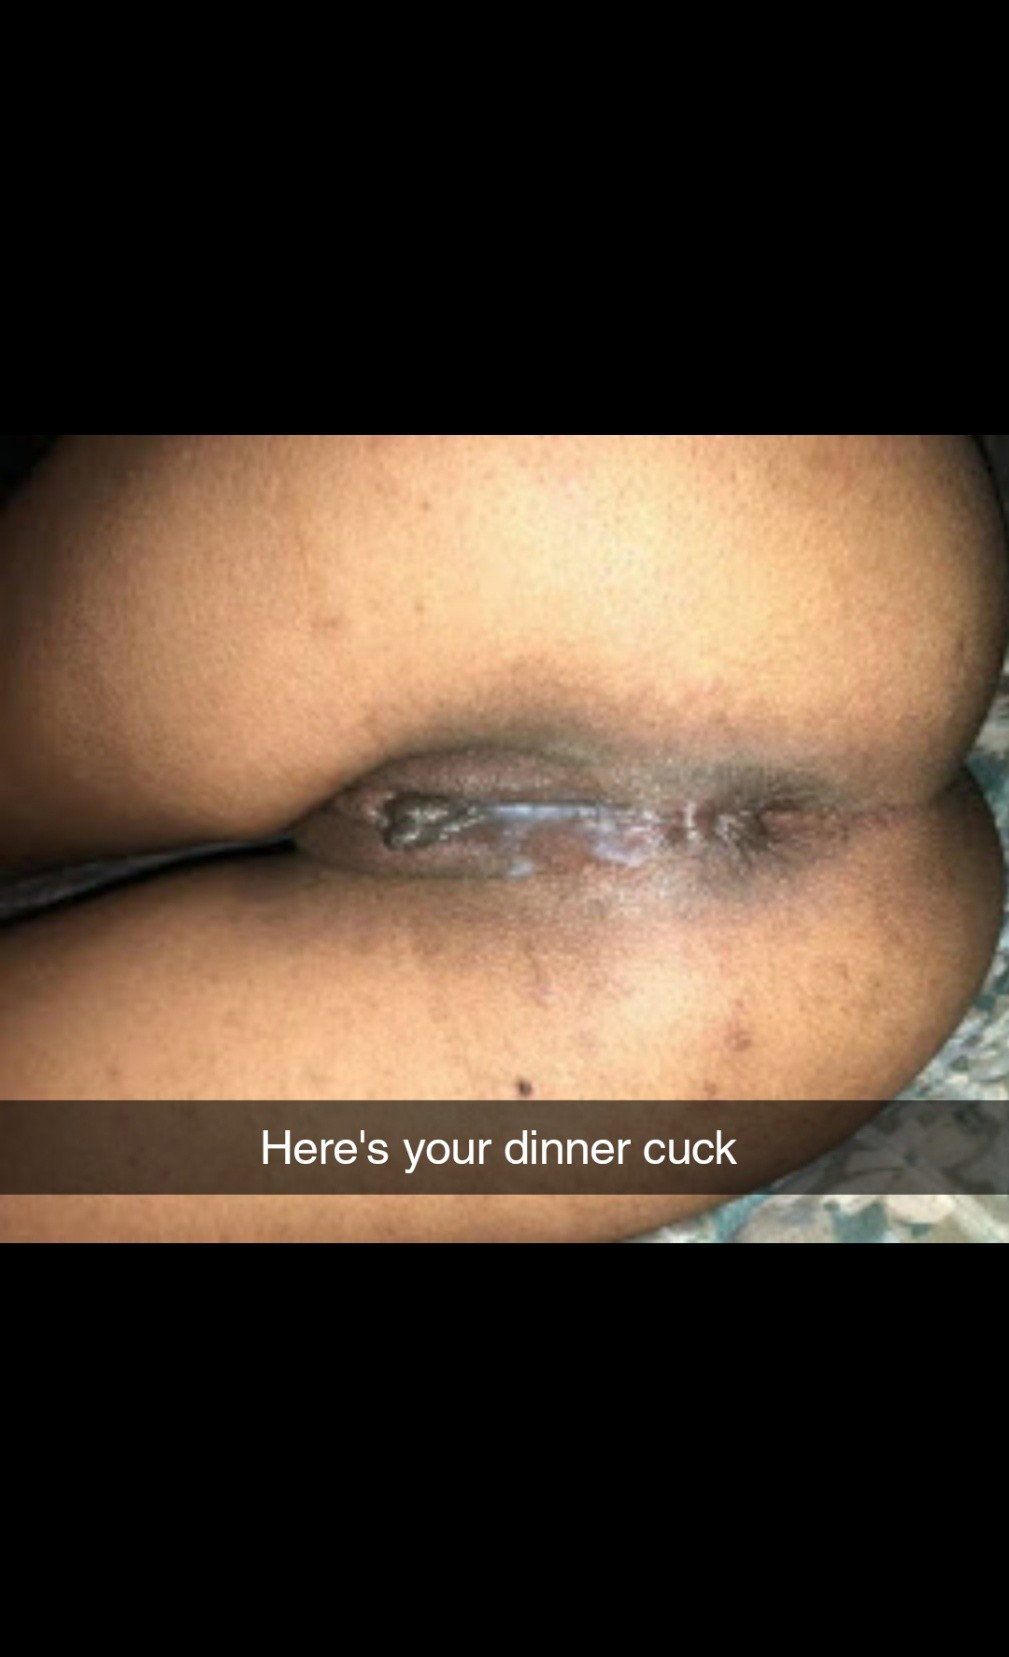 Photo by Fguccd with the username @Fguccd,  October 15, 2020 at 3:13 AM. The post is about the topic Hotwife/Cuckold Snapchat